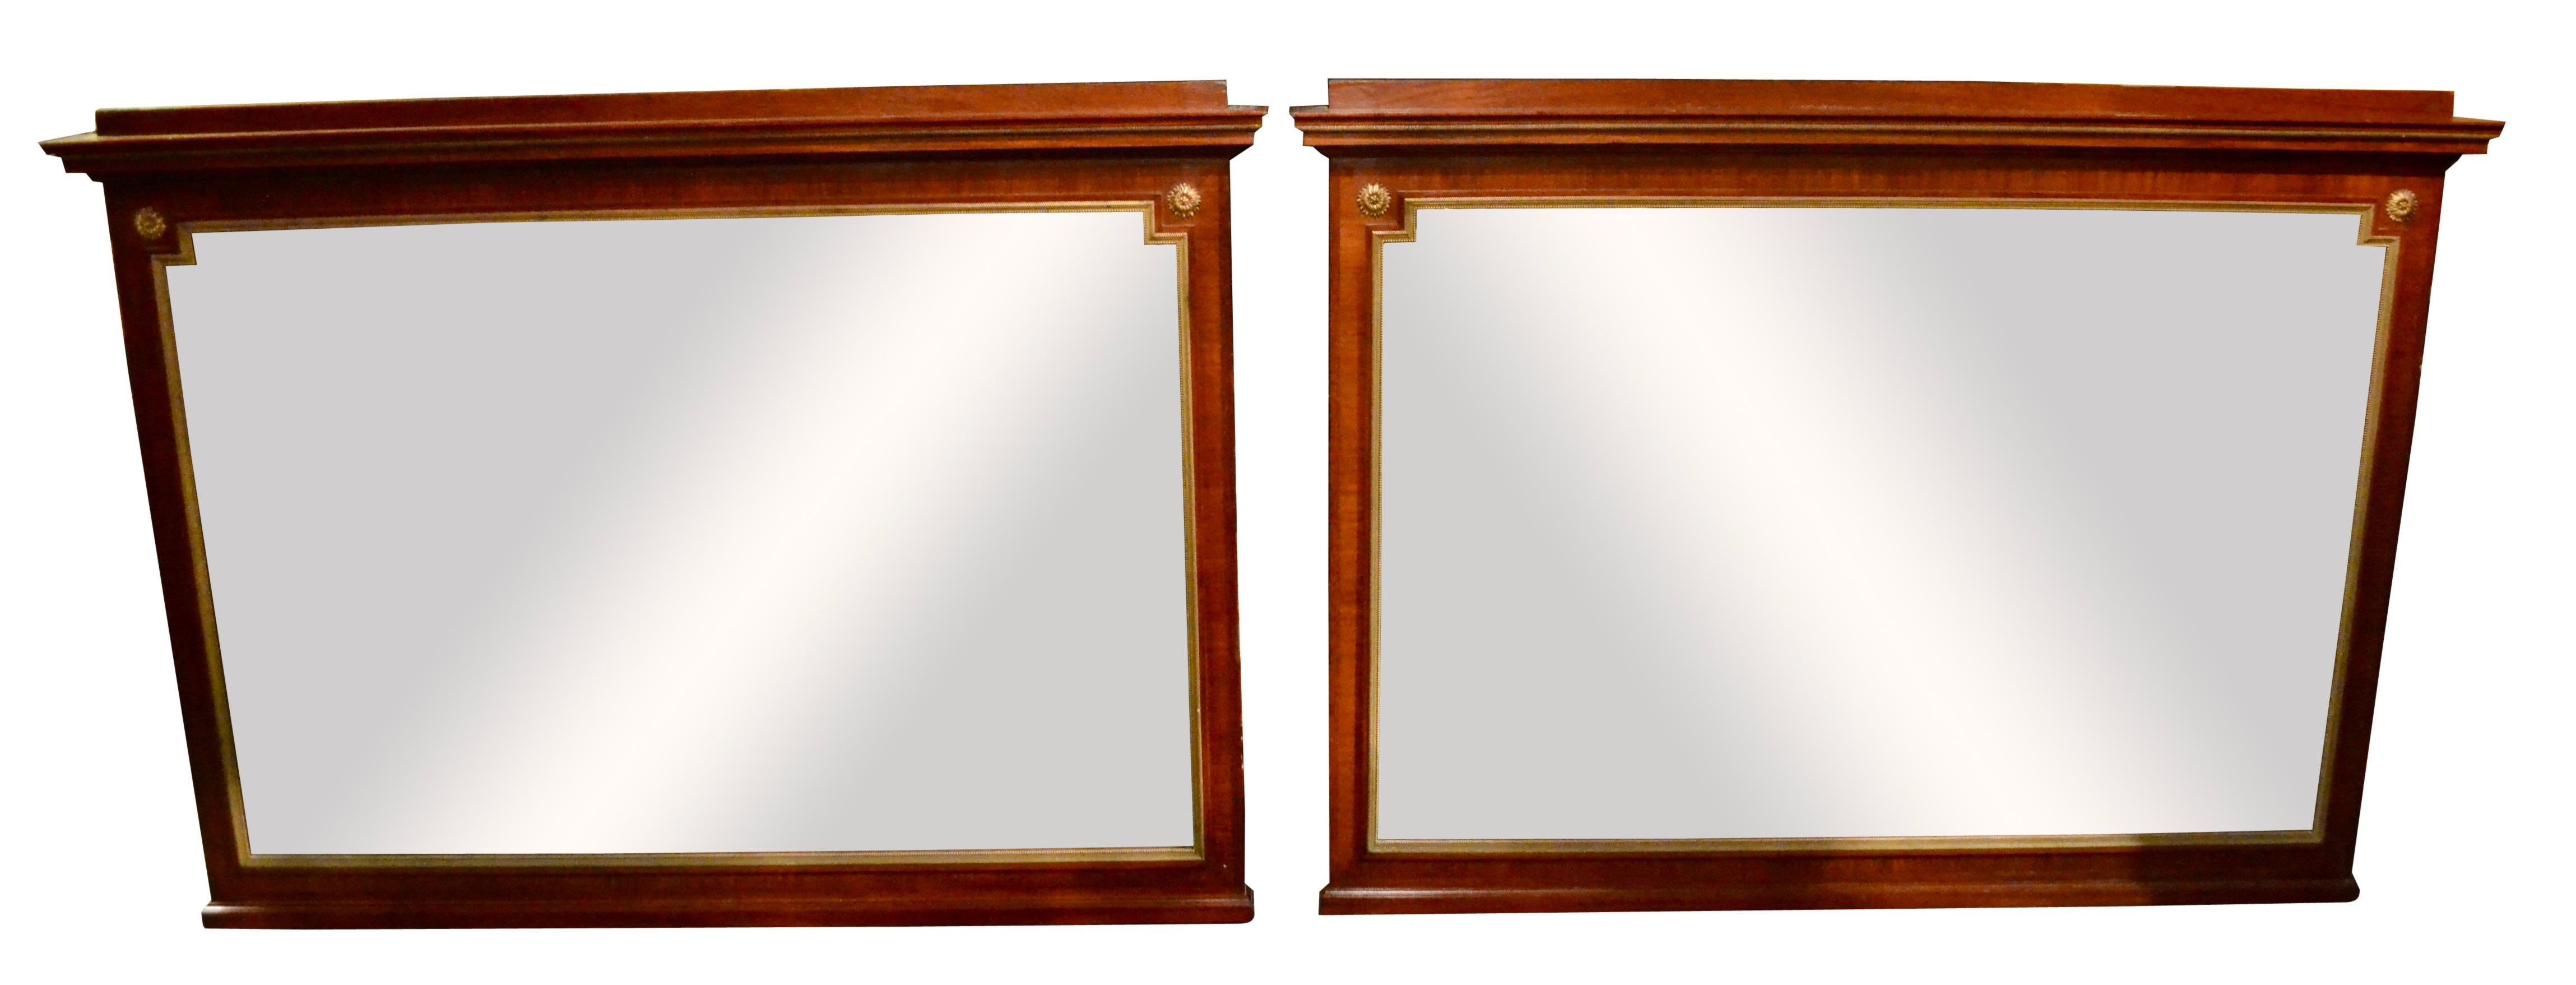 A fine pair of relatively large Empire style rectangular mirrors; the frames having a gilded bronze molding around the glass, and gilt rosettes on the top two sides; the mirrors are bevelled on all sides; there is a small stepped pediment at the top